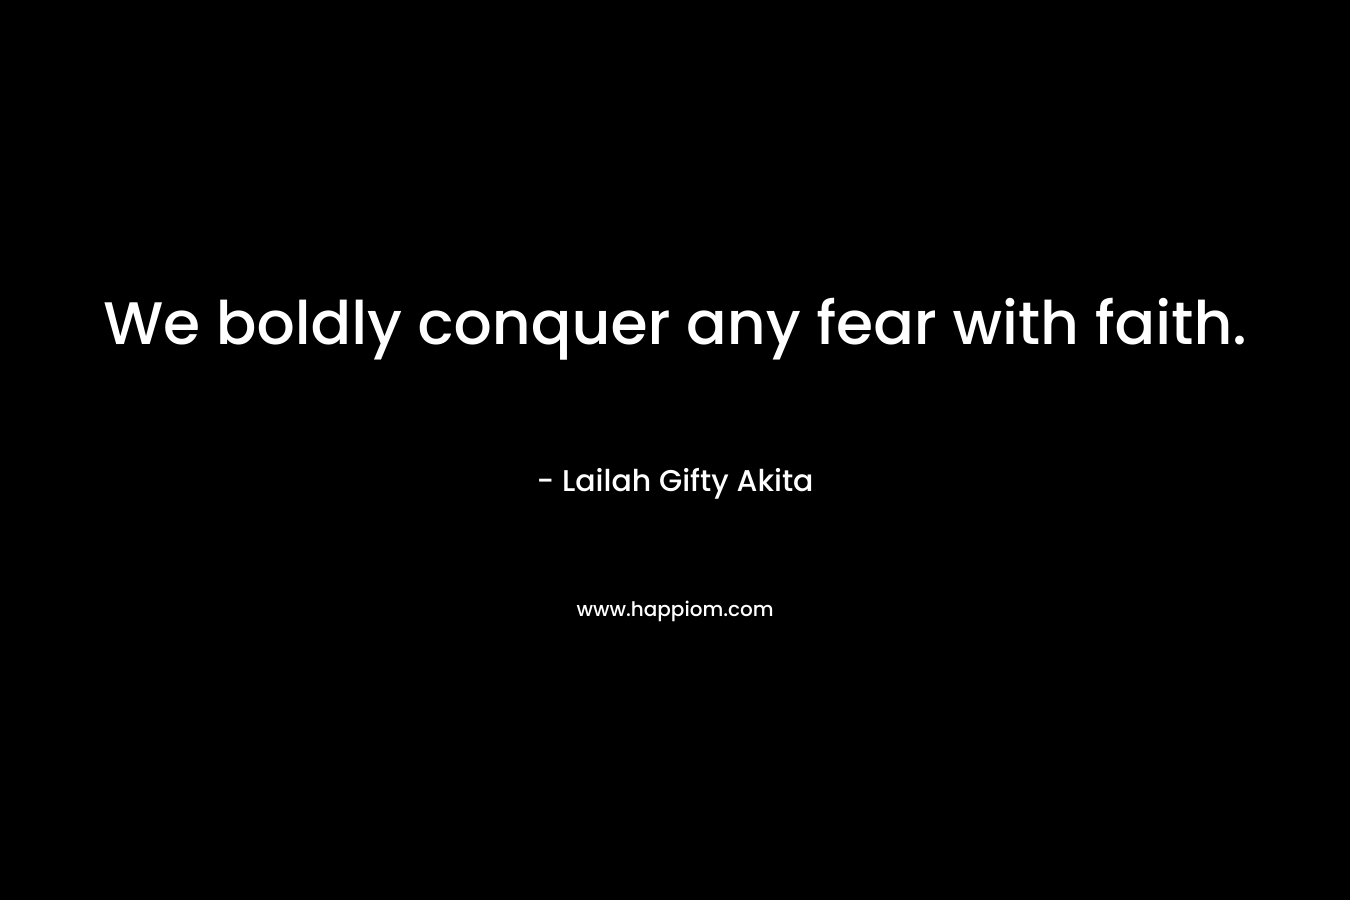 We boldly conquer any fear with faith.